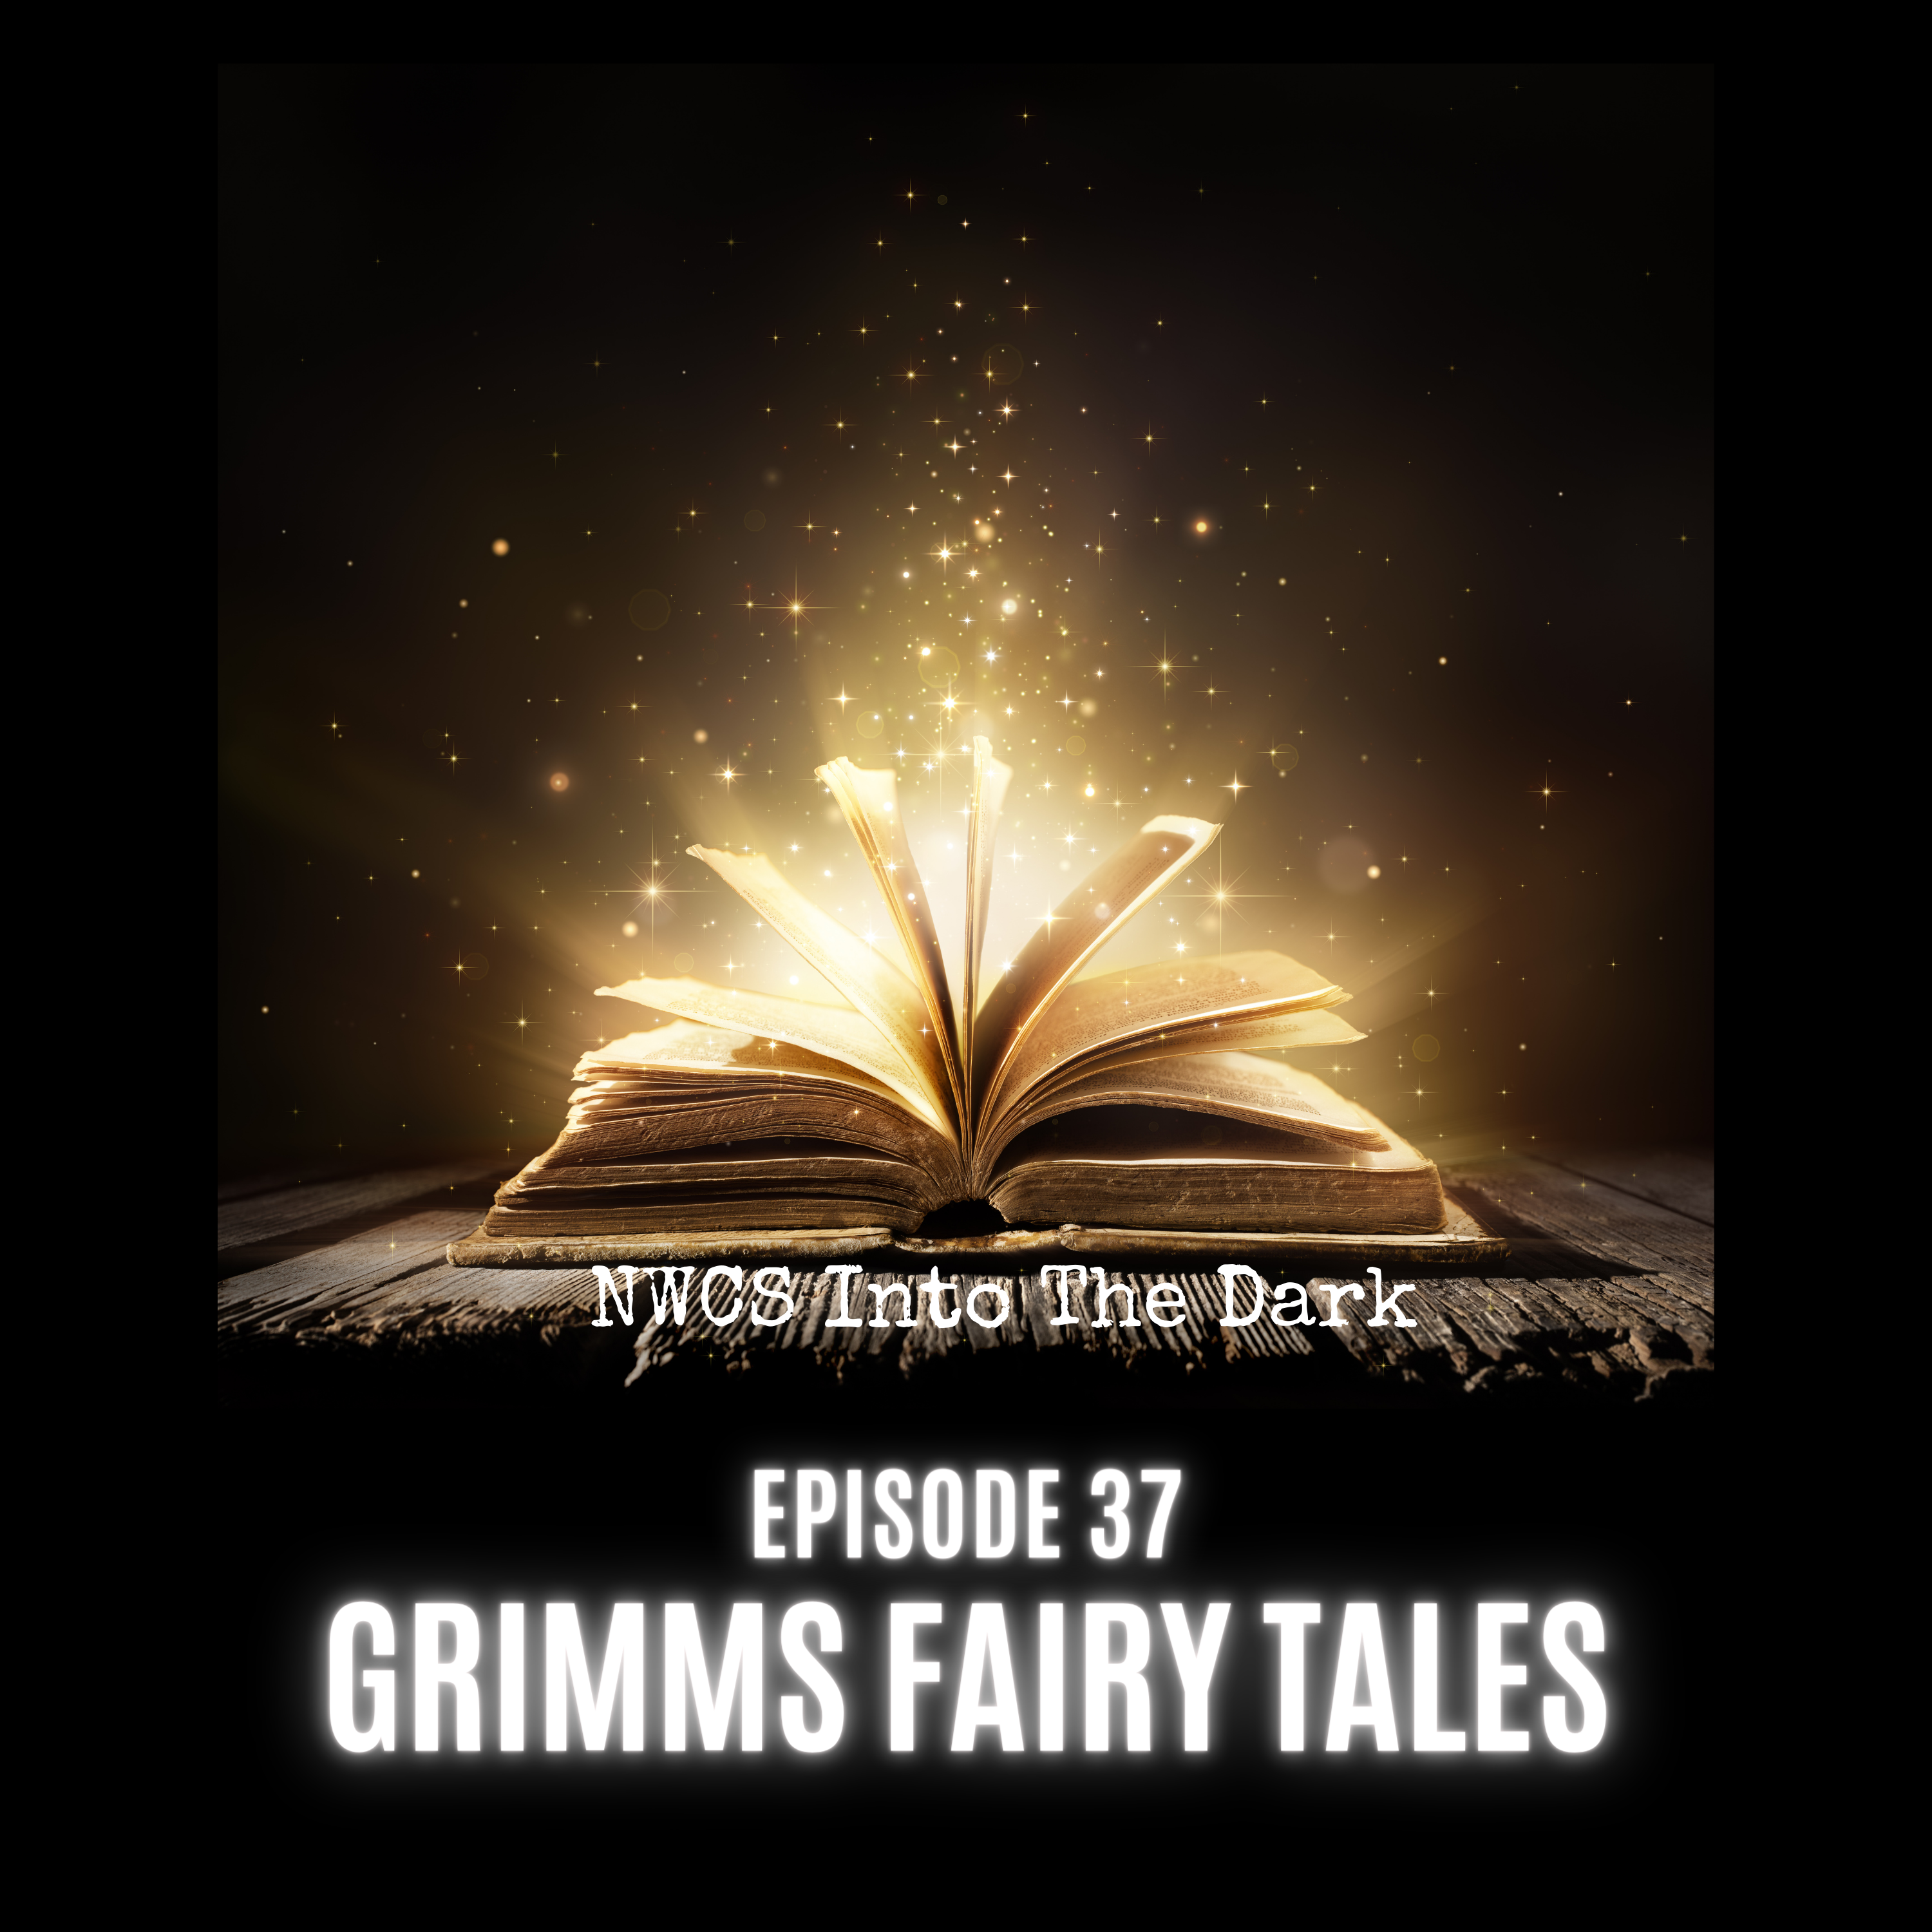 NWCS Into The Dark - Episode 37 Grimm's Fairy Tales